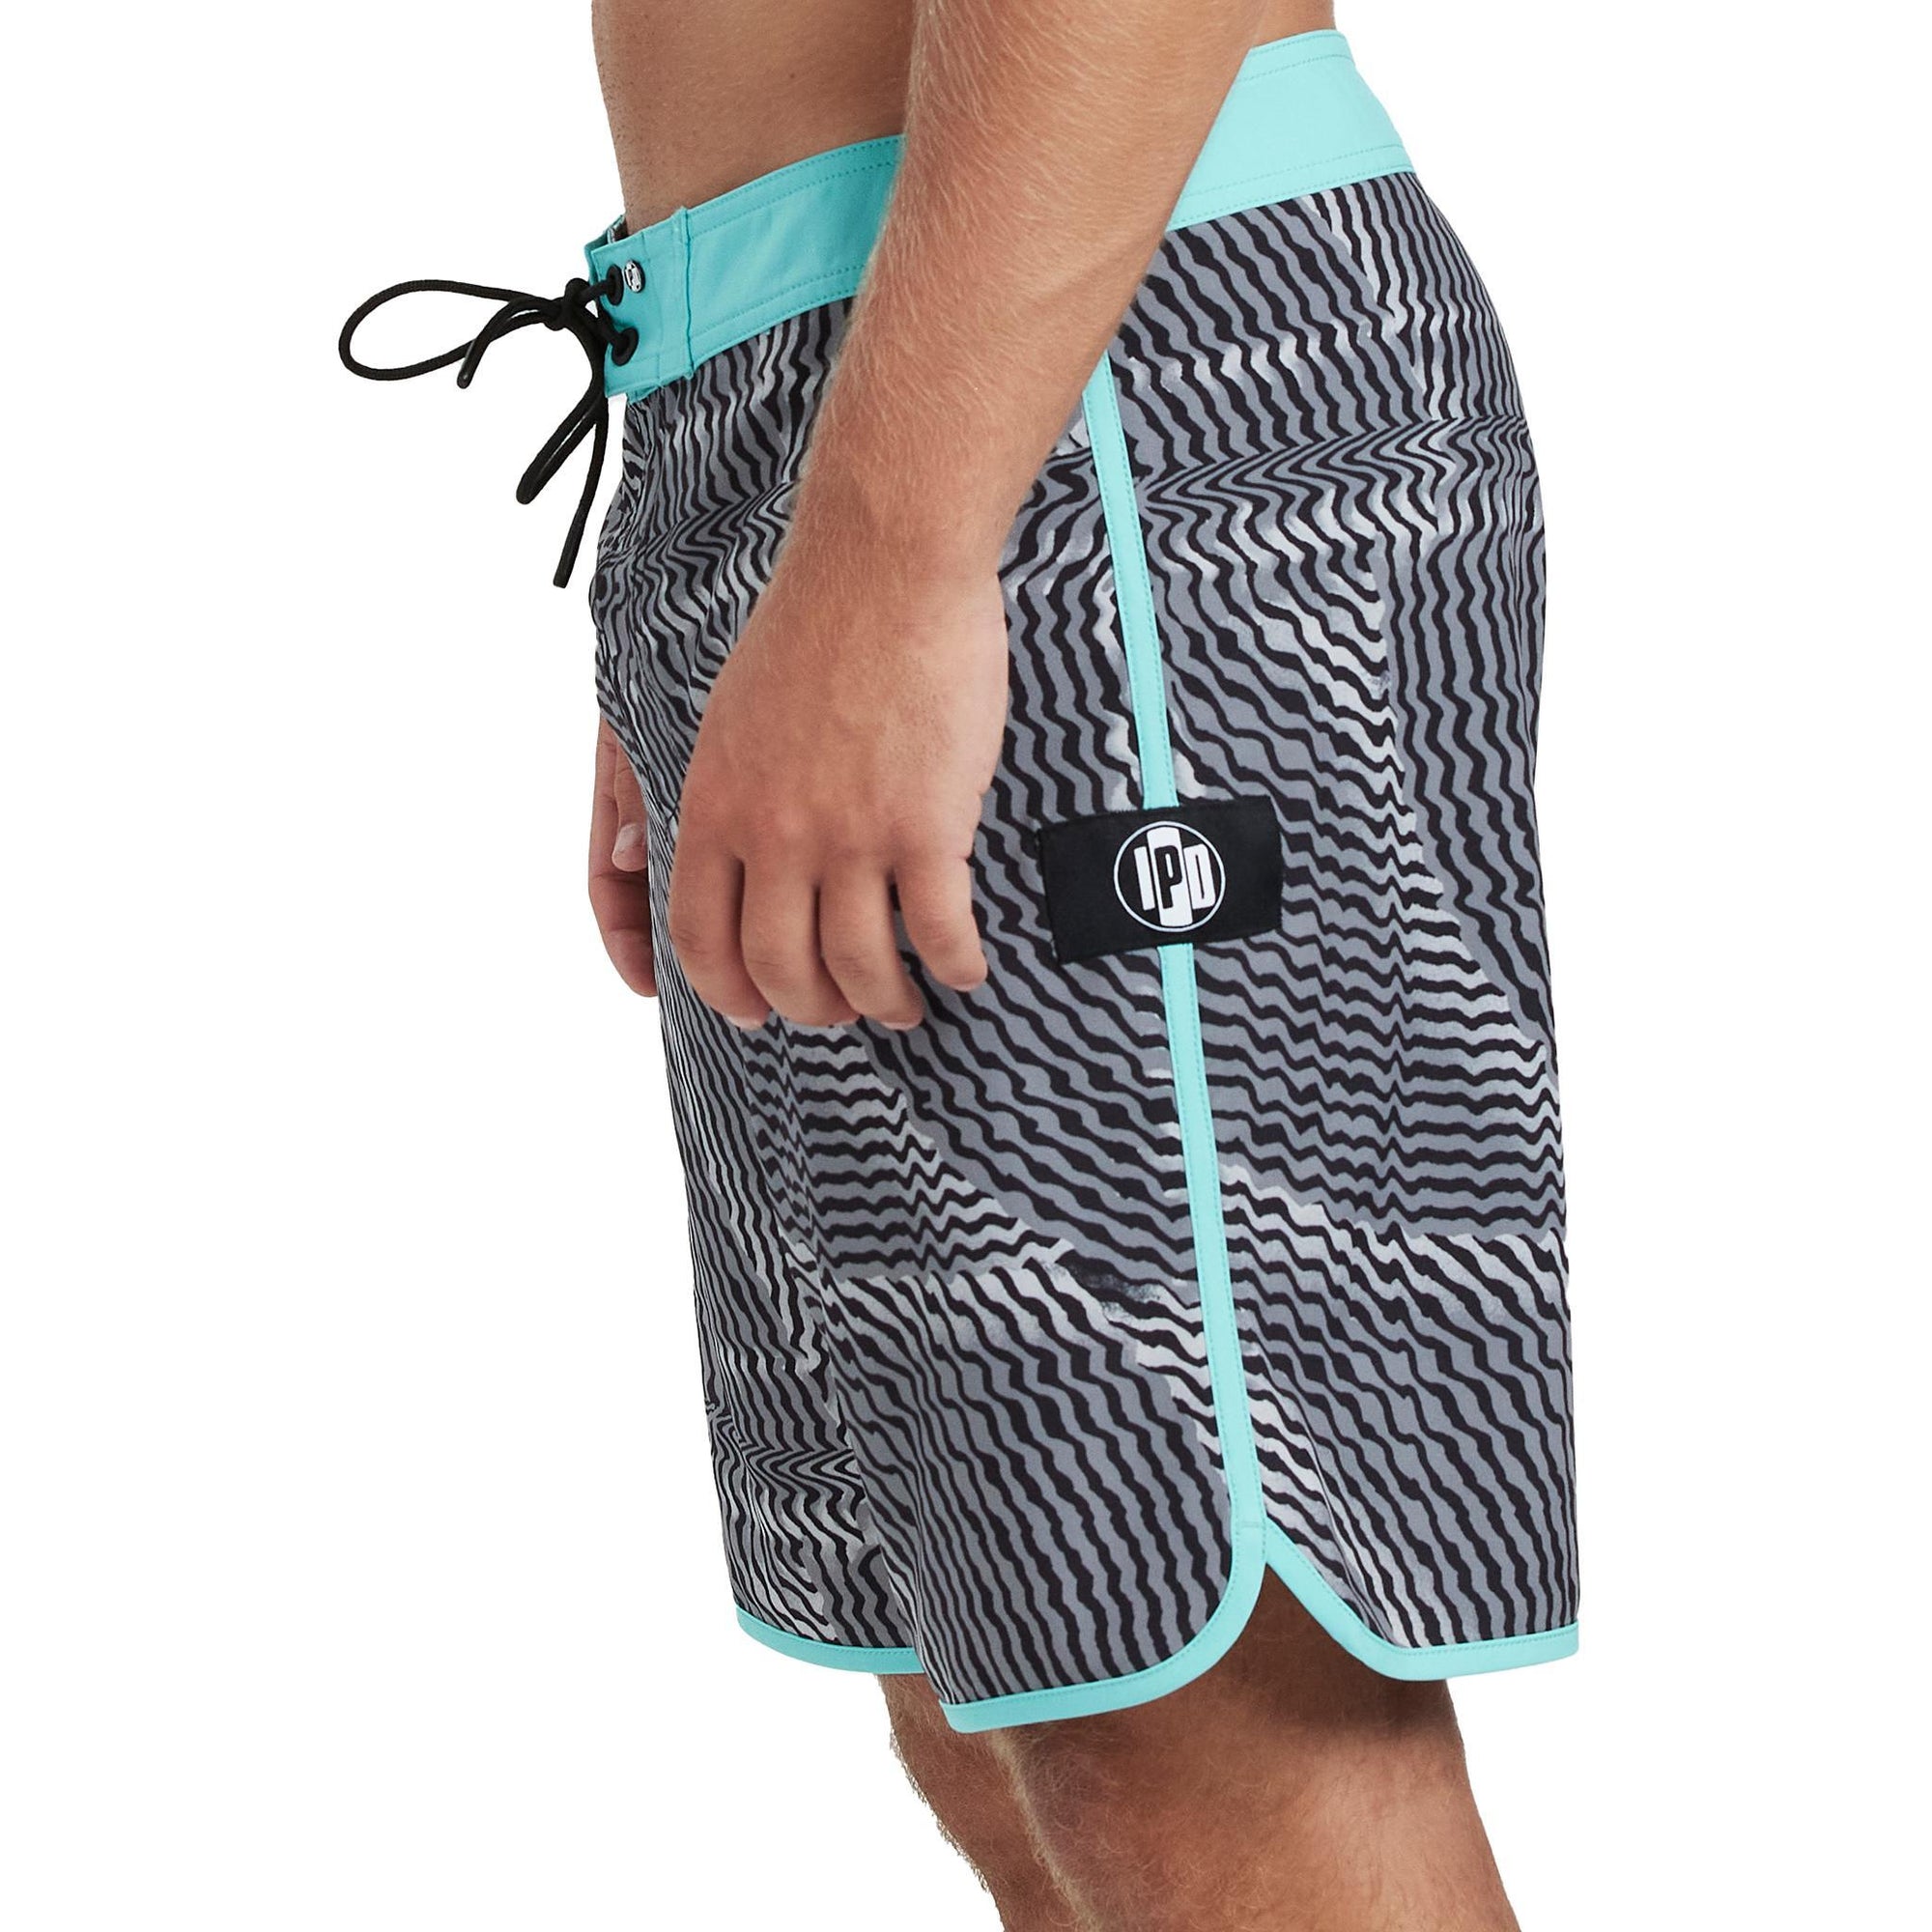 Front side view of navy blue and olive green abstract striped boardshorts with blends of red and an I P D logo on the side.